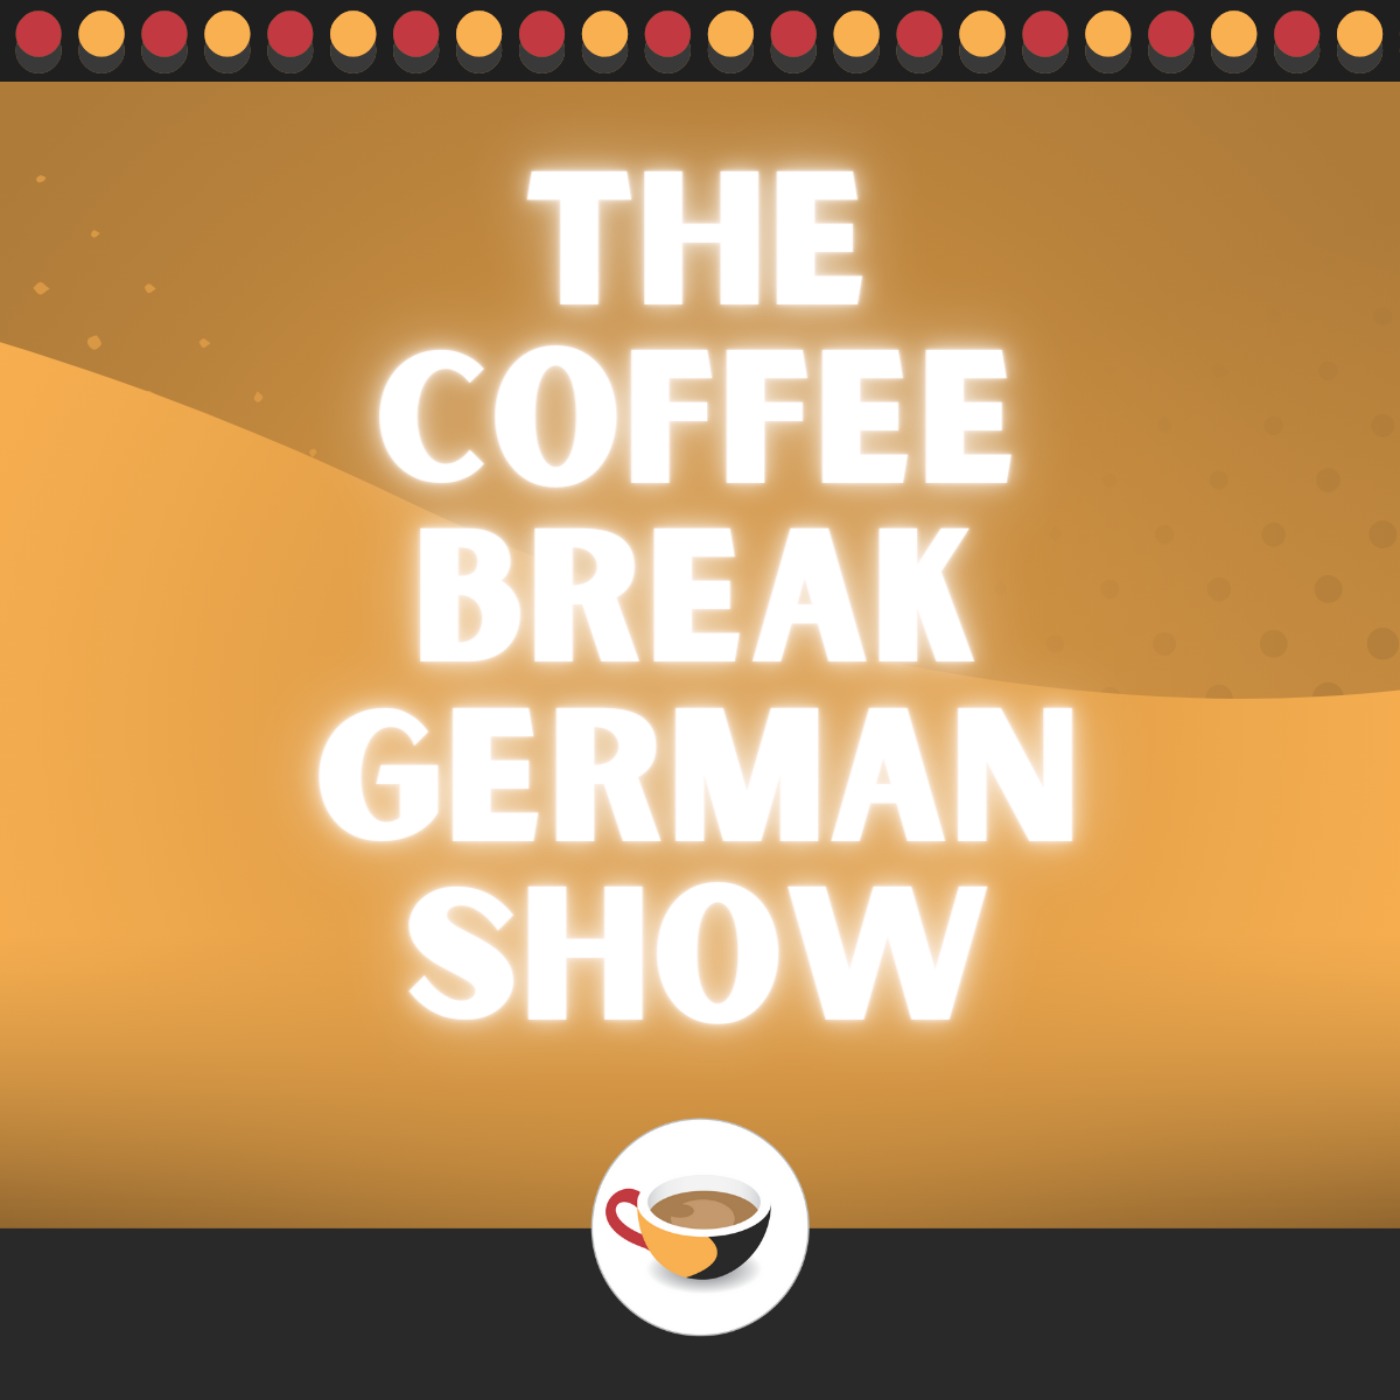 A guide to German word order - Sentences with two verbs | The Coffee Break German Show 1.01